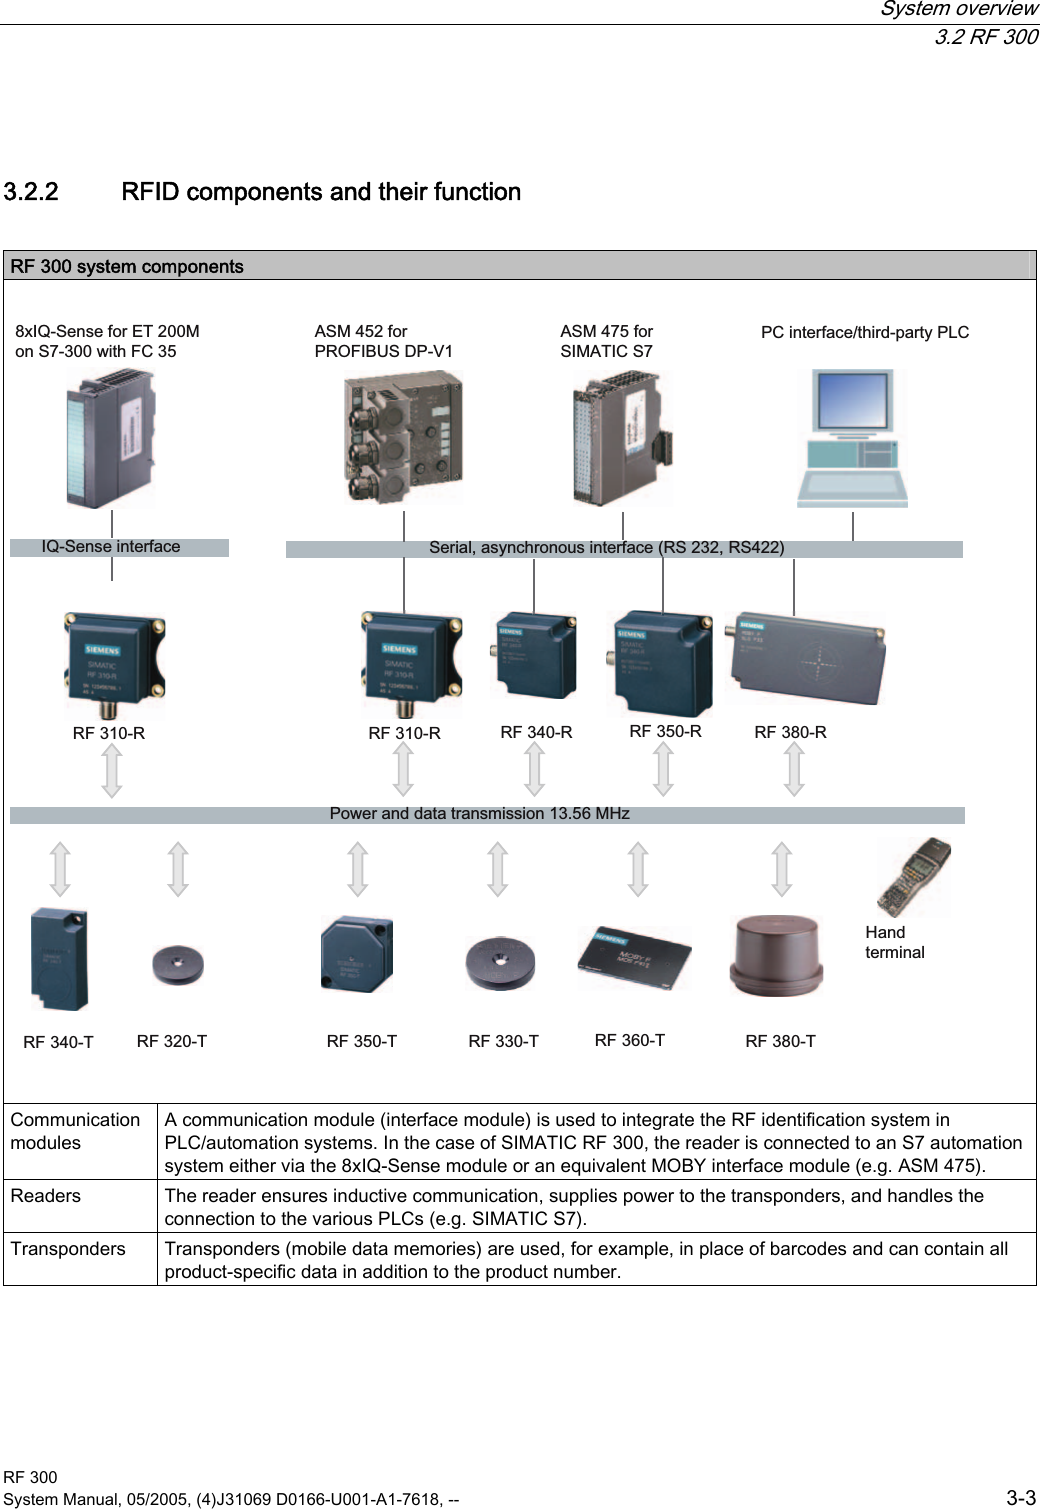  System overview  3.2 RF 300 RF 300 System Manual, 05/2005, (4)J31069 D0166-U001-A1-7618, --  3-3 3.2.2  RFID components and their function  RF 300 system components  6HULDODV\QFKURQRXVLQWHUIDFH56565)7 5)73RZHUDQGGDWDWUDQVPLVVLRQ0+]5)5,46HQVHLQWHUIDFH+DQGWHUPLQDO[,46HQVHIRU(70RQ6ZLWK)&amp;3&amp;LQWHUIDFHWKLUGSDUW\3/&amp;$60IRU6,0$7,&amp;6$60IRU352),%86&apos;395)7 5)7 5)7 5)75)5 5)5 5)5 5)5  Communication modules A communication module (interface module) is used to integrate the RF identification system in PLC/automation systems. In the case of SIMATIC RF 300, the reader is connected to an S7 automation system either via the 8xIQ-Sense module or an equivalent MOBY interface module (e.g. ASM 475). Readers  The reader ensures inductive communication, supplies power to the transponders, and handles the connection to the various PLCs (e.g. SIMATIC S7). Transponders  Transponders (mobile data memories) are used, for example, in place of barcodes and can contain all product-specific data in addition to the product number.  